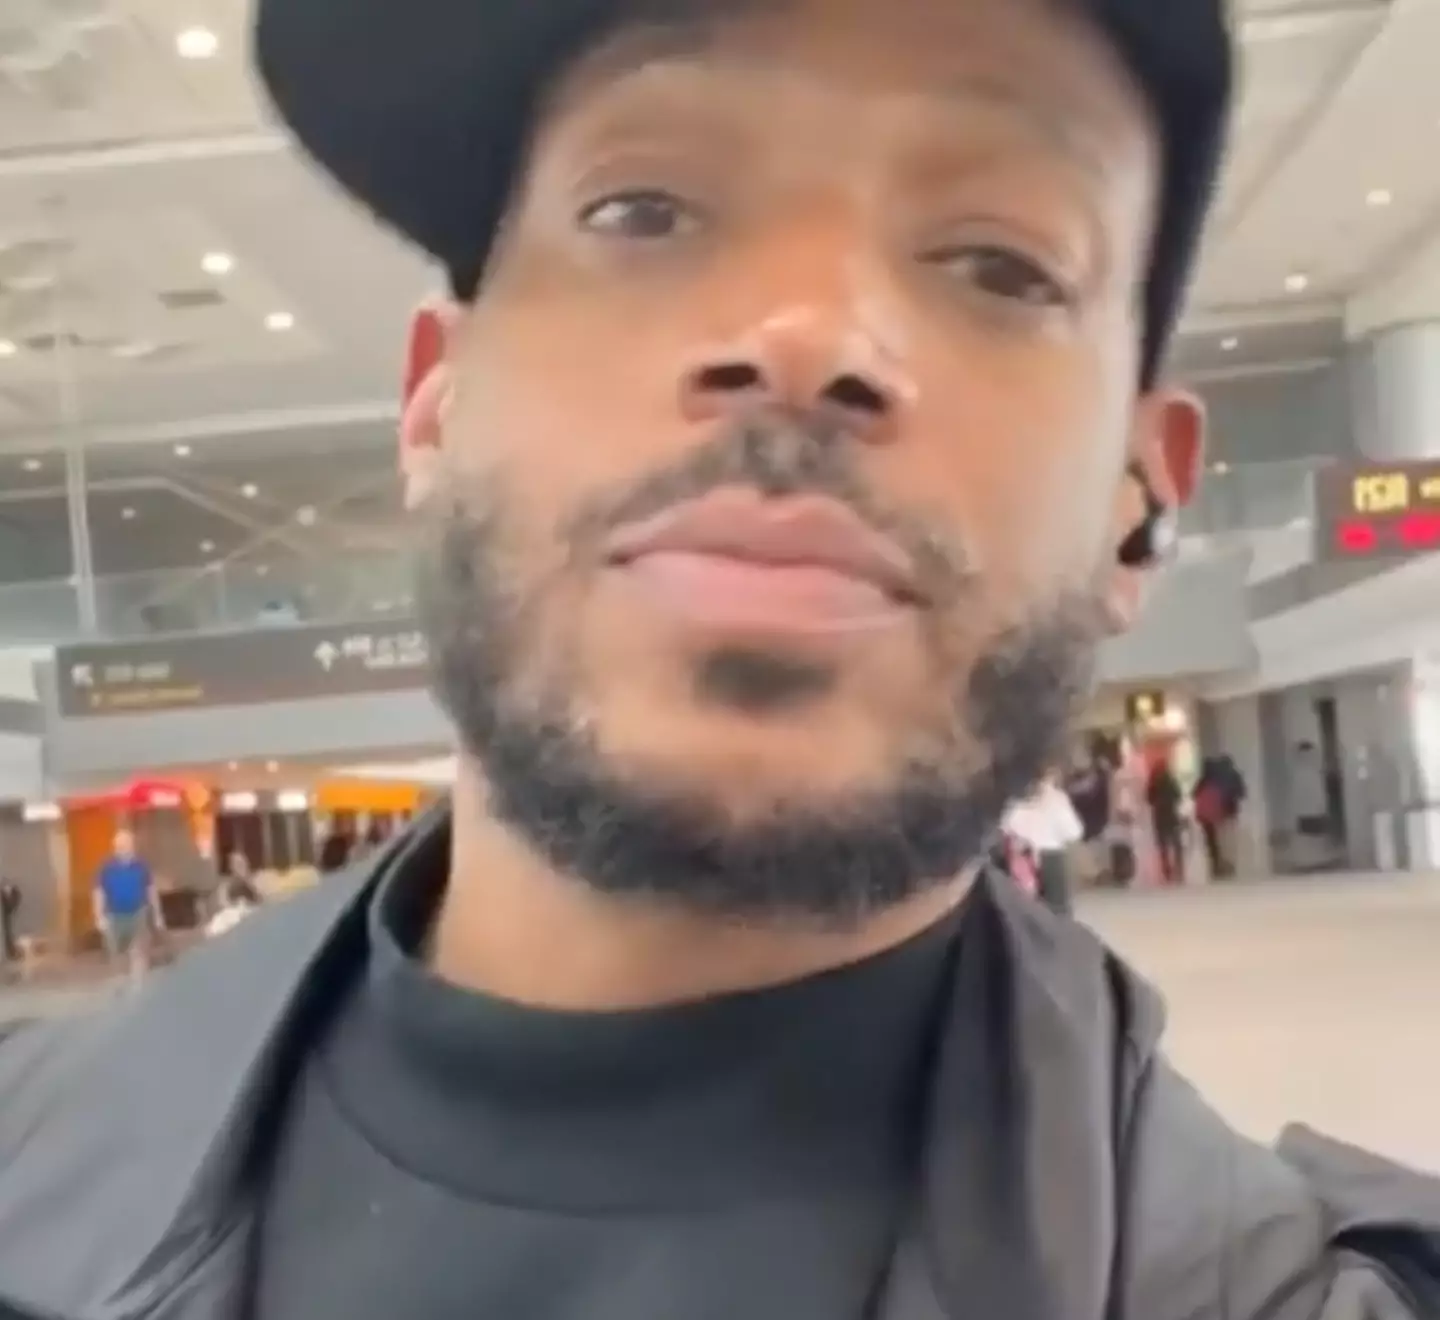 Marlon Wayans claims he was 'targeted' after he was kicked off the flight.